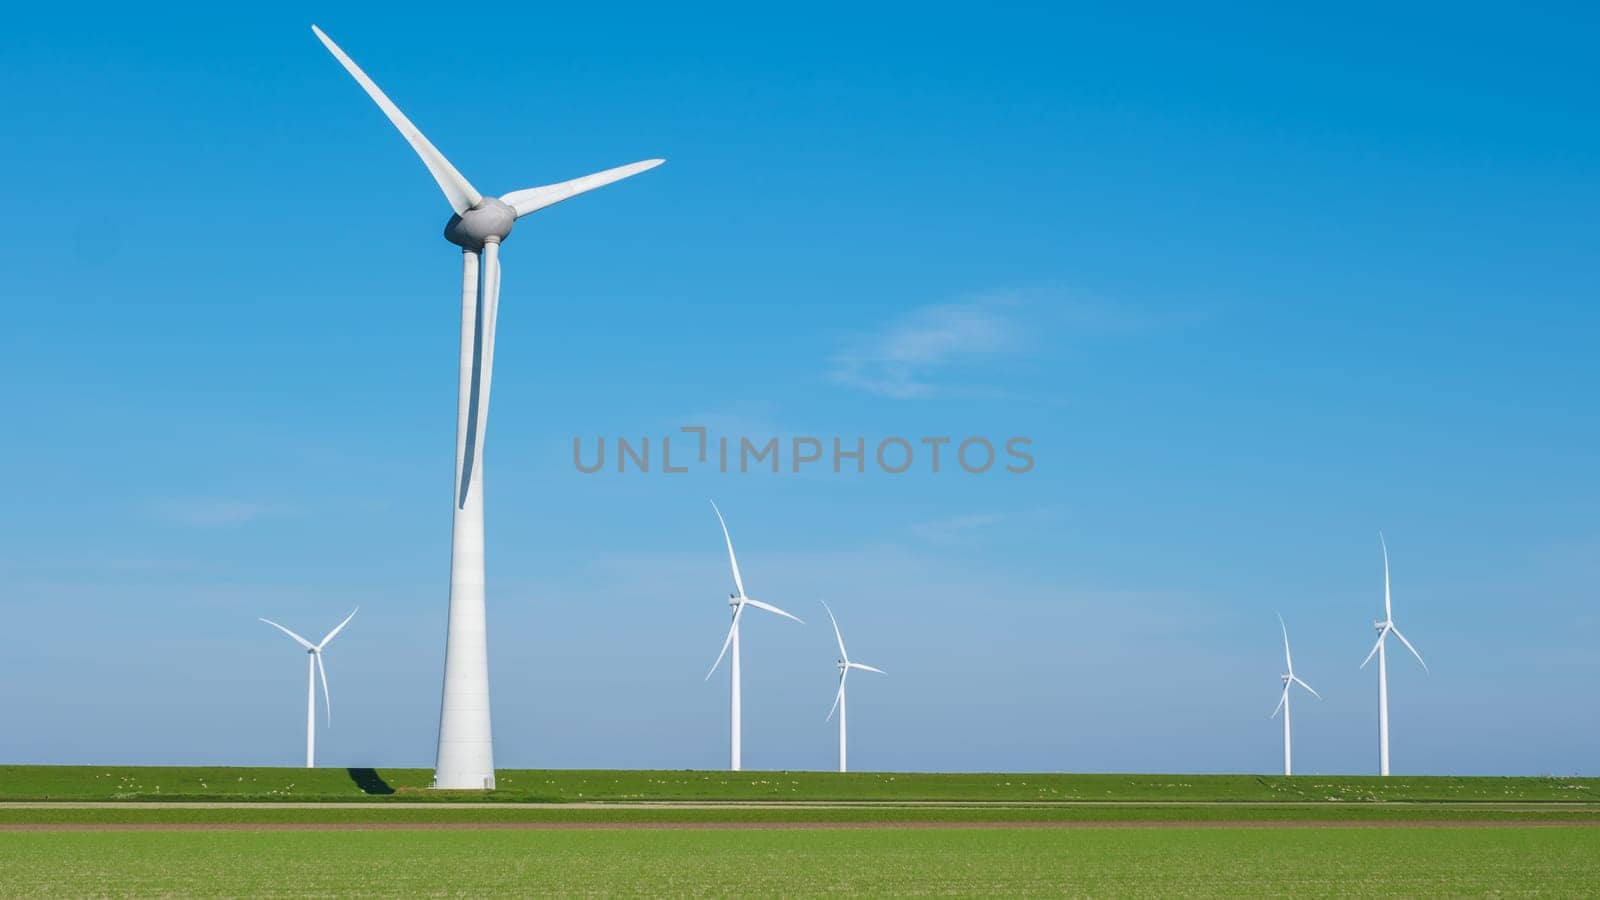 A group of wind turbines dance gracefully in a lush green field under the clear blue sky, harnessing the power of the wind to generate clean energy.